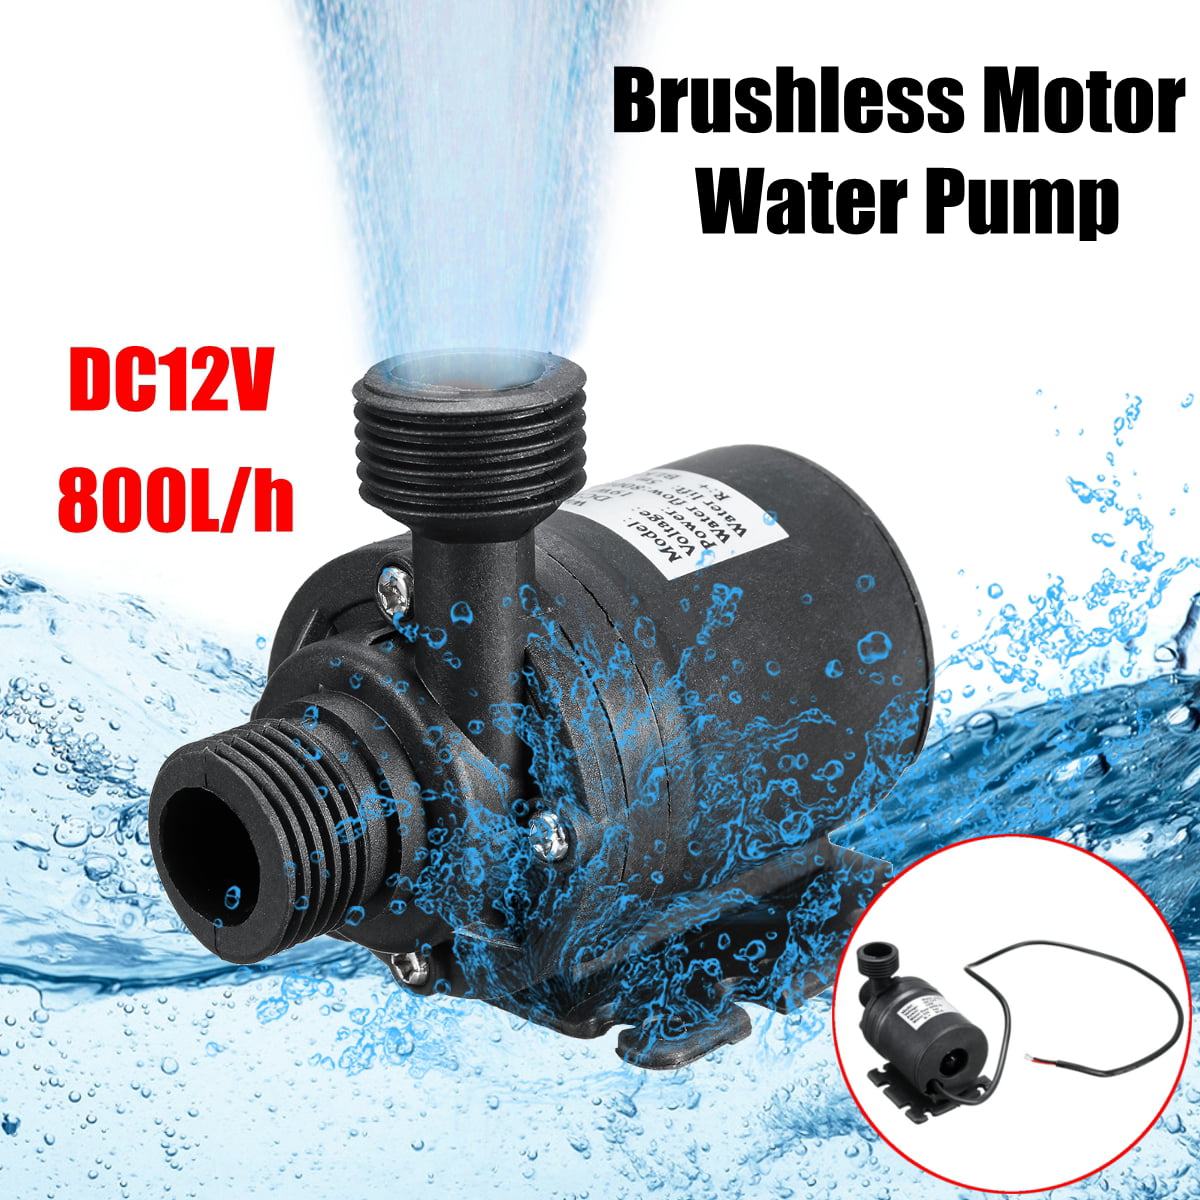 Water Pump Ultra Quiet DC 12V 32W Lift 7m 900L/H Brushless Motor Submersible